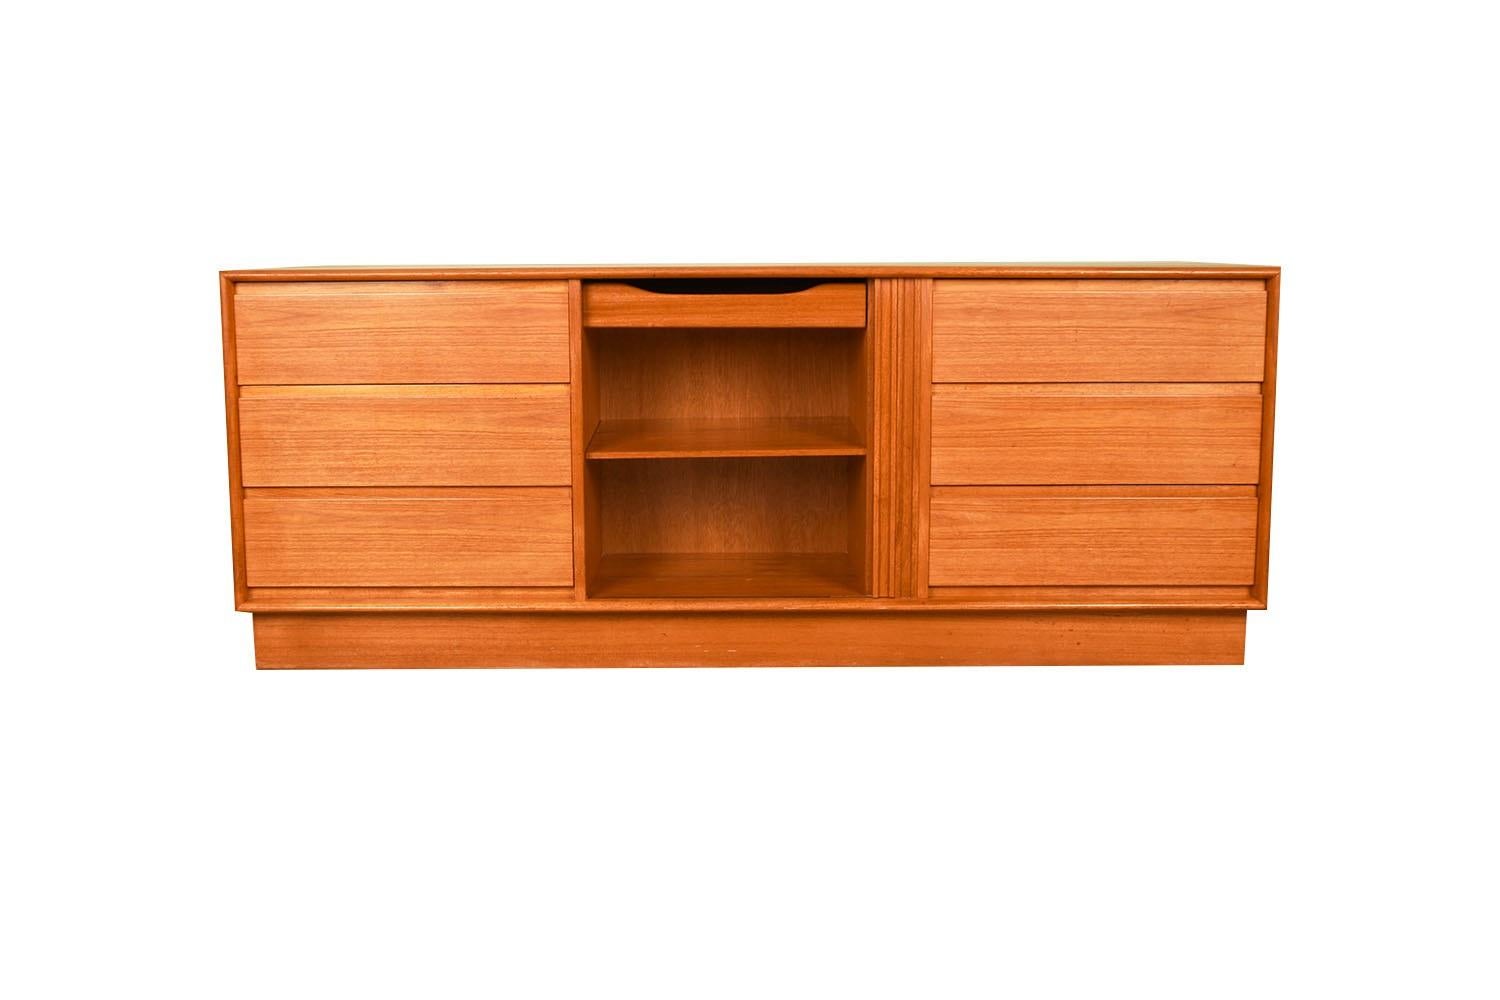 Beautiful mid-century modern tambour door dresser, circa 1970’s, by Danflex made in Denmark. Features six dovetailed drawers with sculptured drawer pulls, flanking one center tambour door that opens to reveal a storage area with one removable shelf